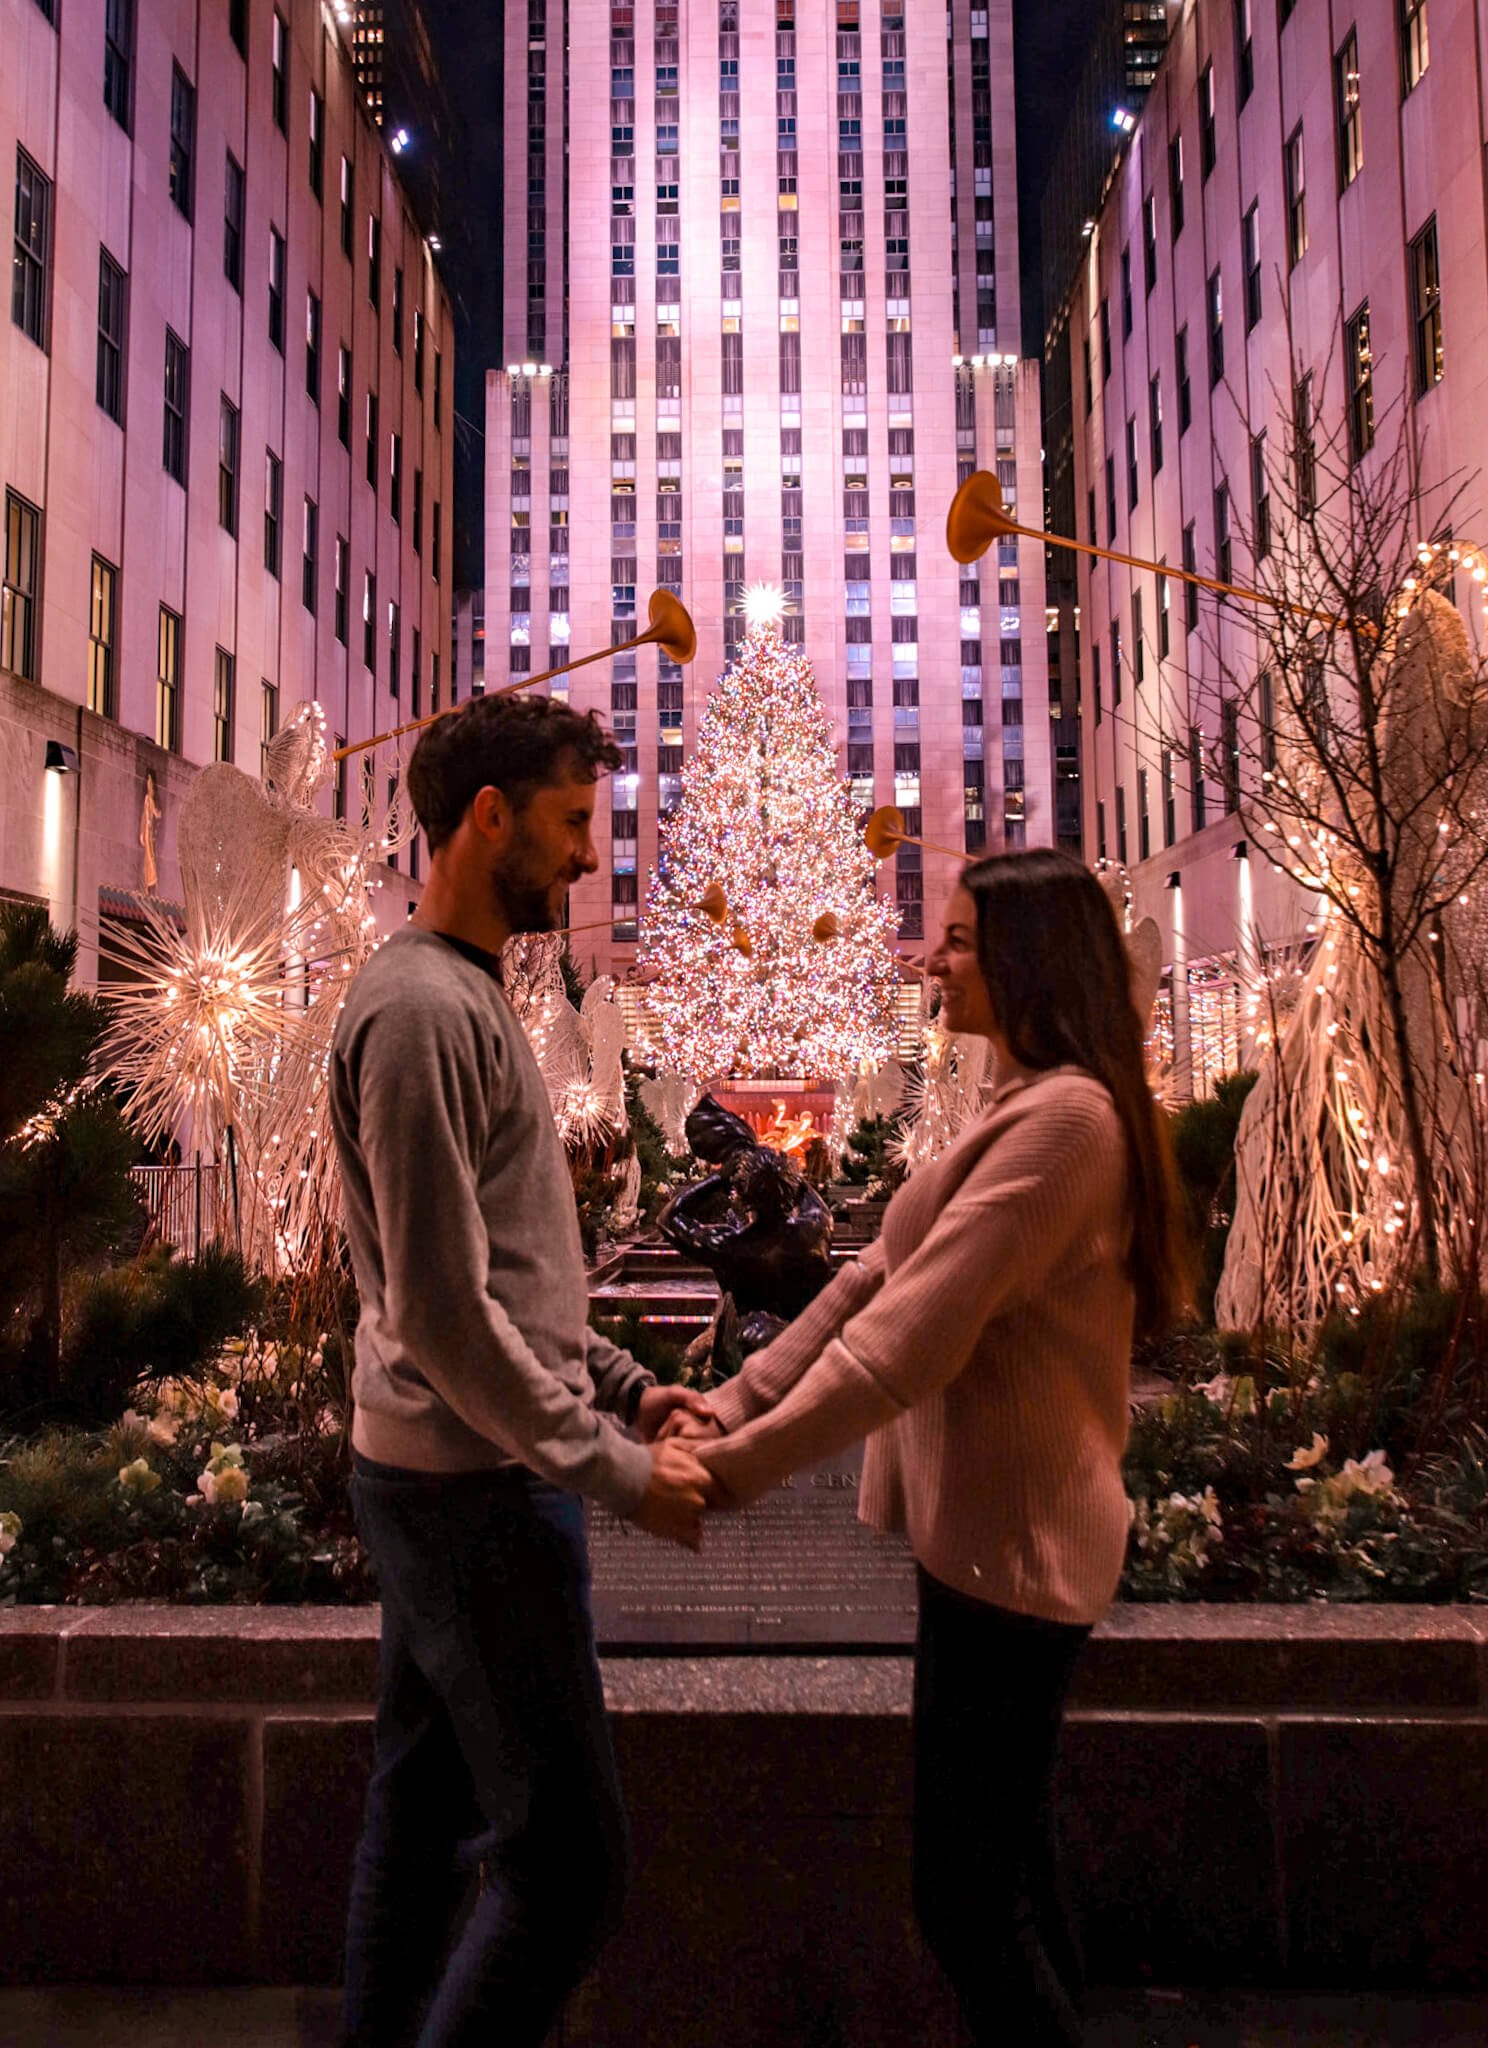 Rockefeller Center, Christmas Tree lights in NYC, things to do in December in New York